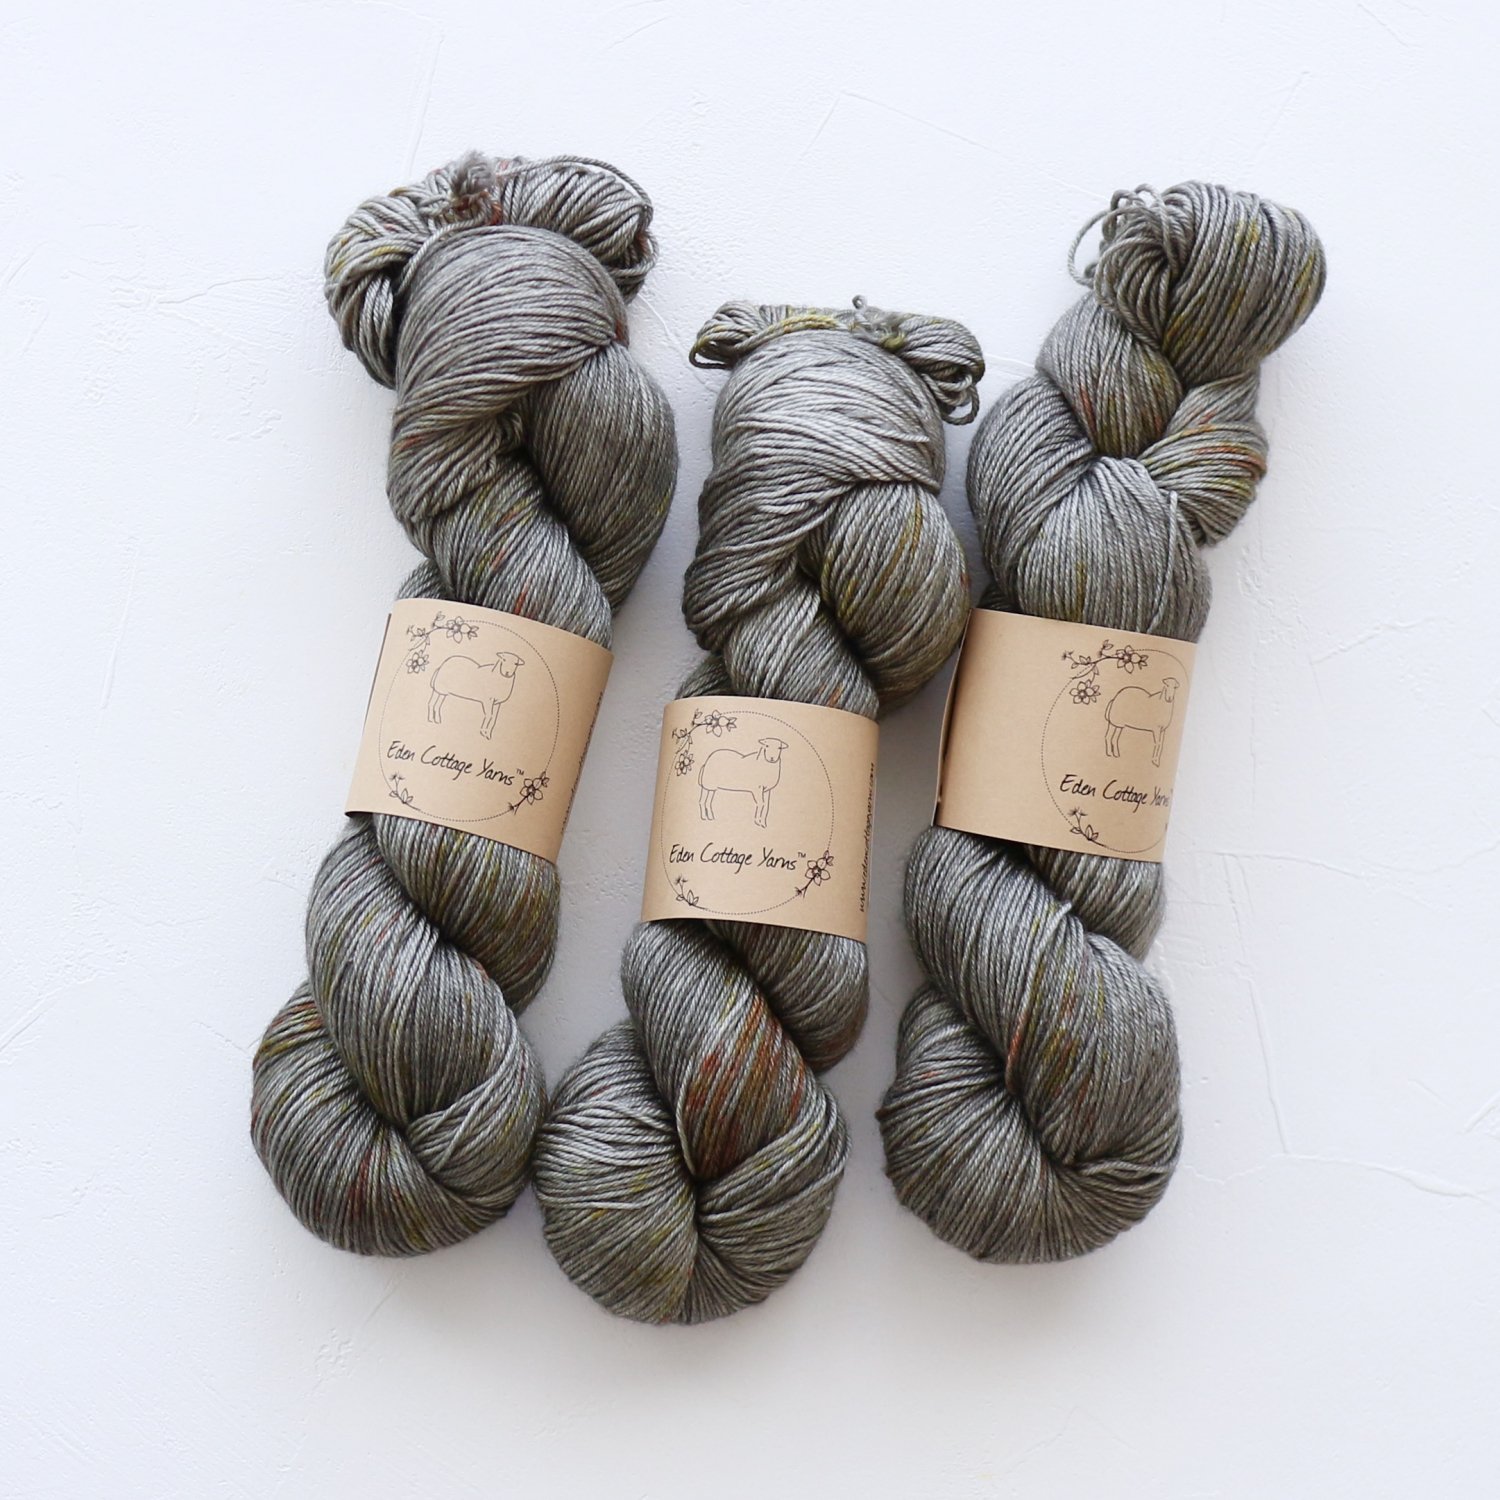 【Eden Cottage Yarns】<br>Titus 4ply<br>Starling